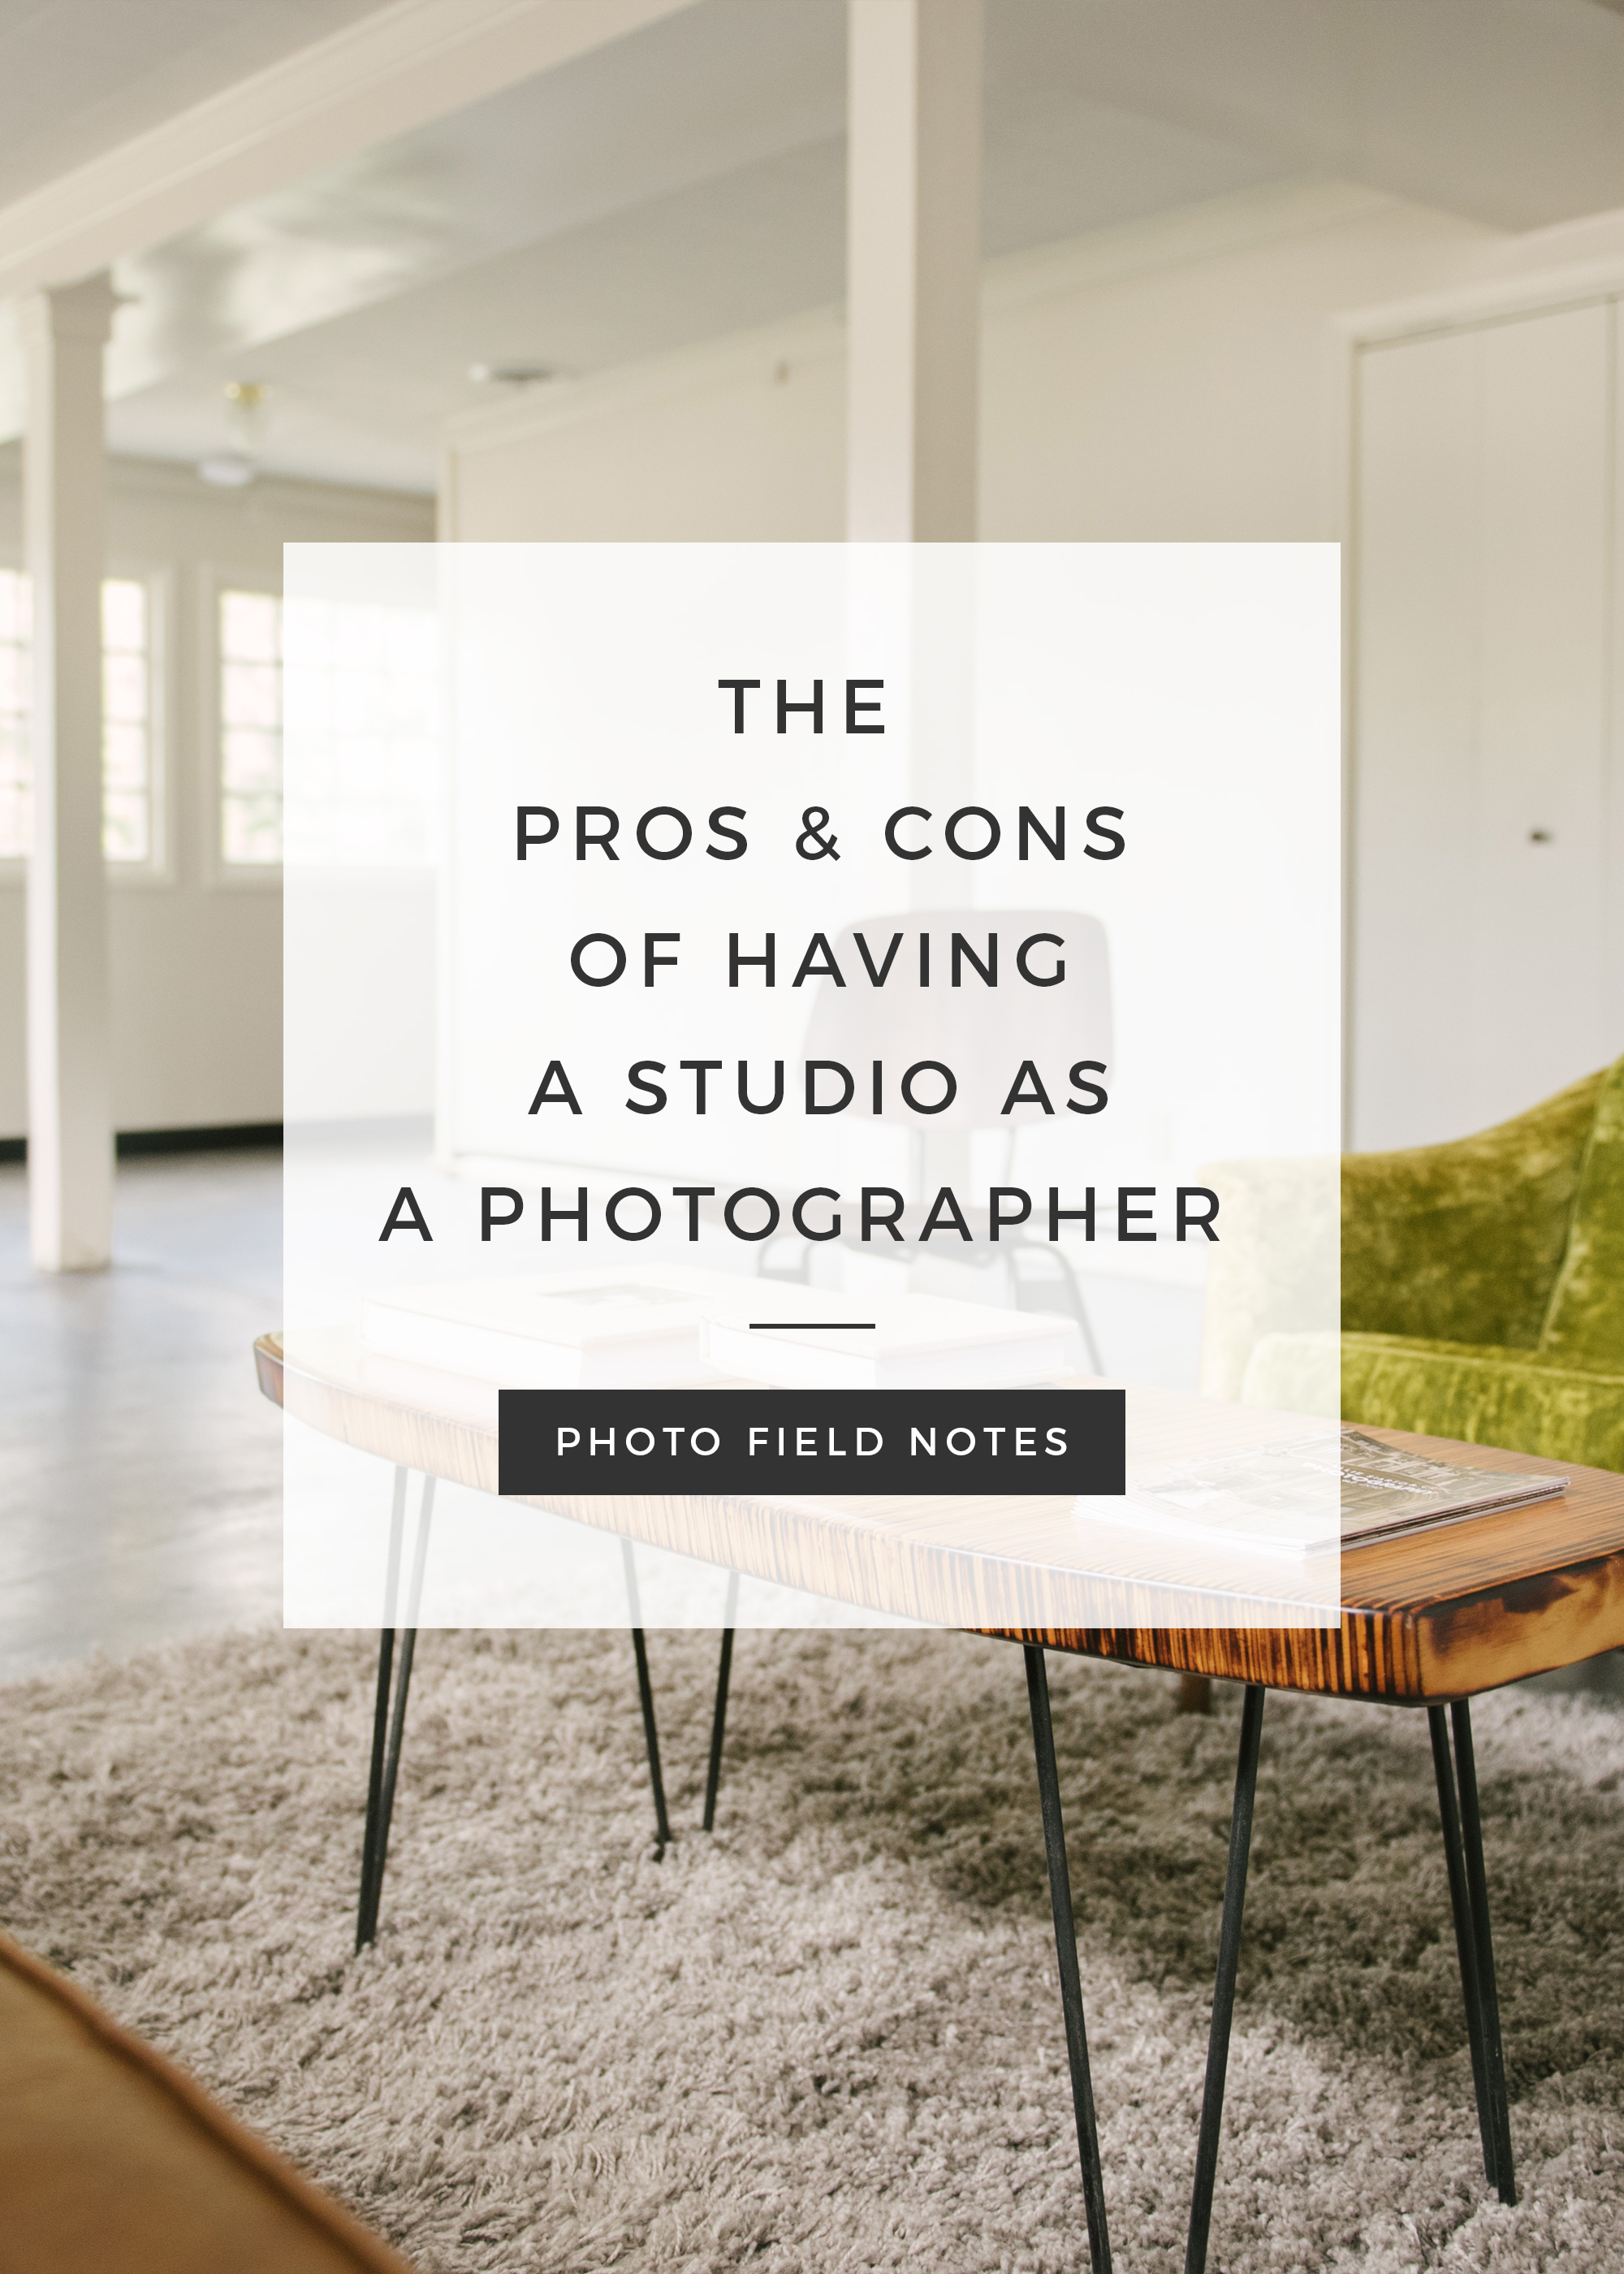 The pros and cons of having a studio as a photographer